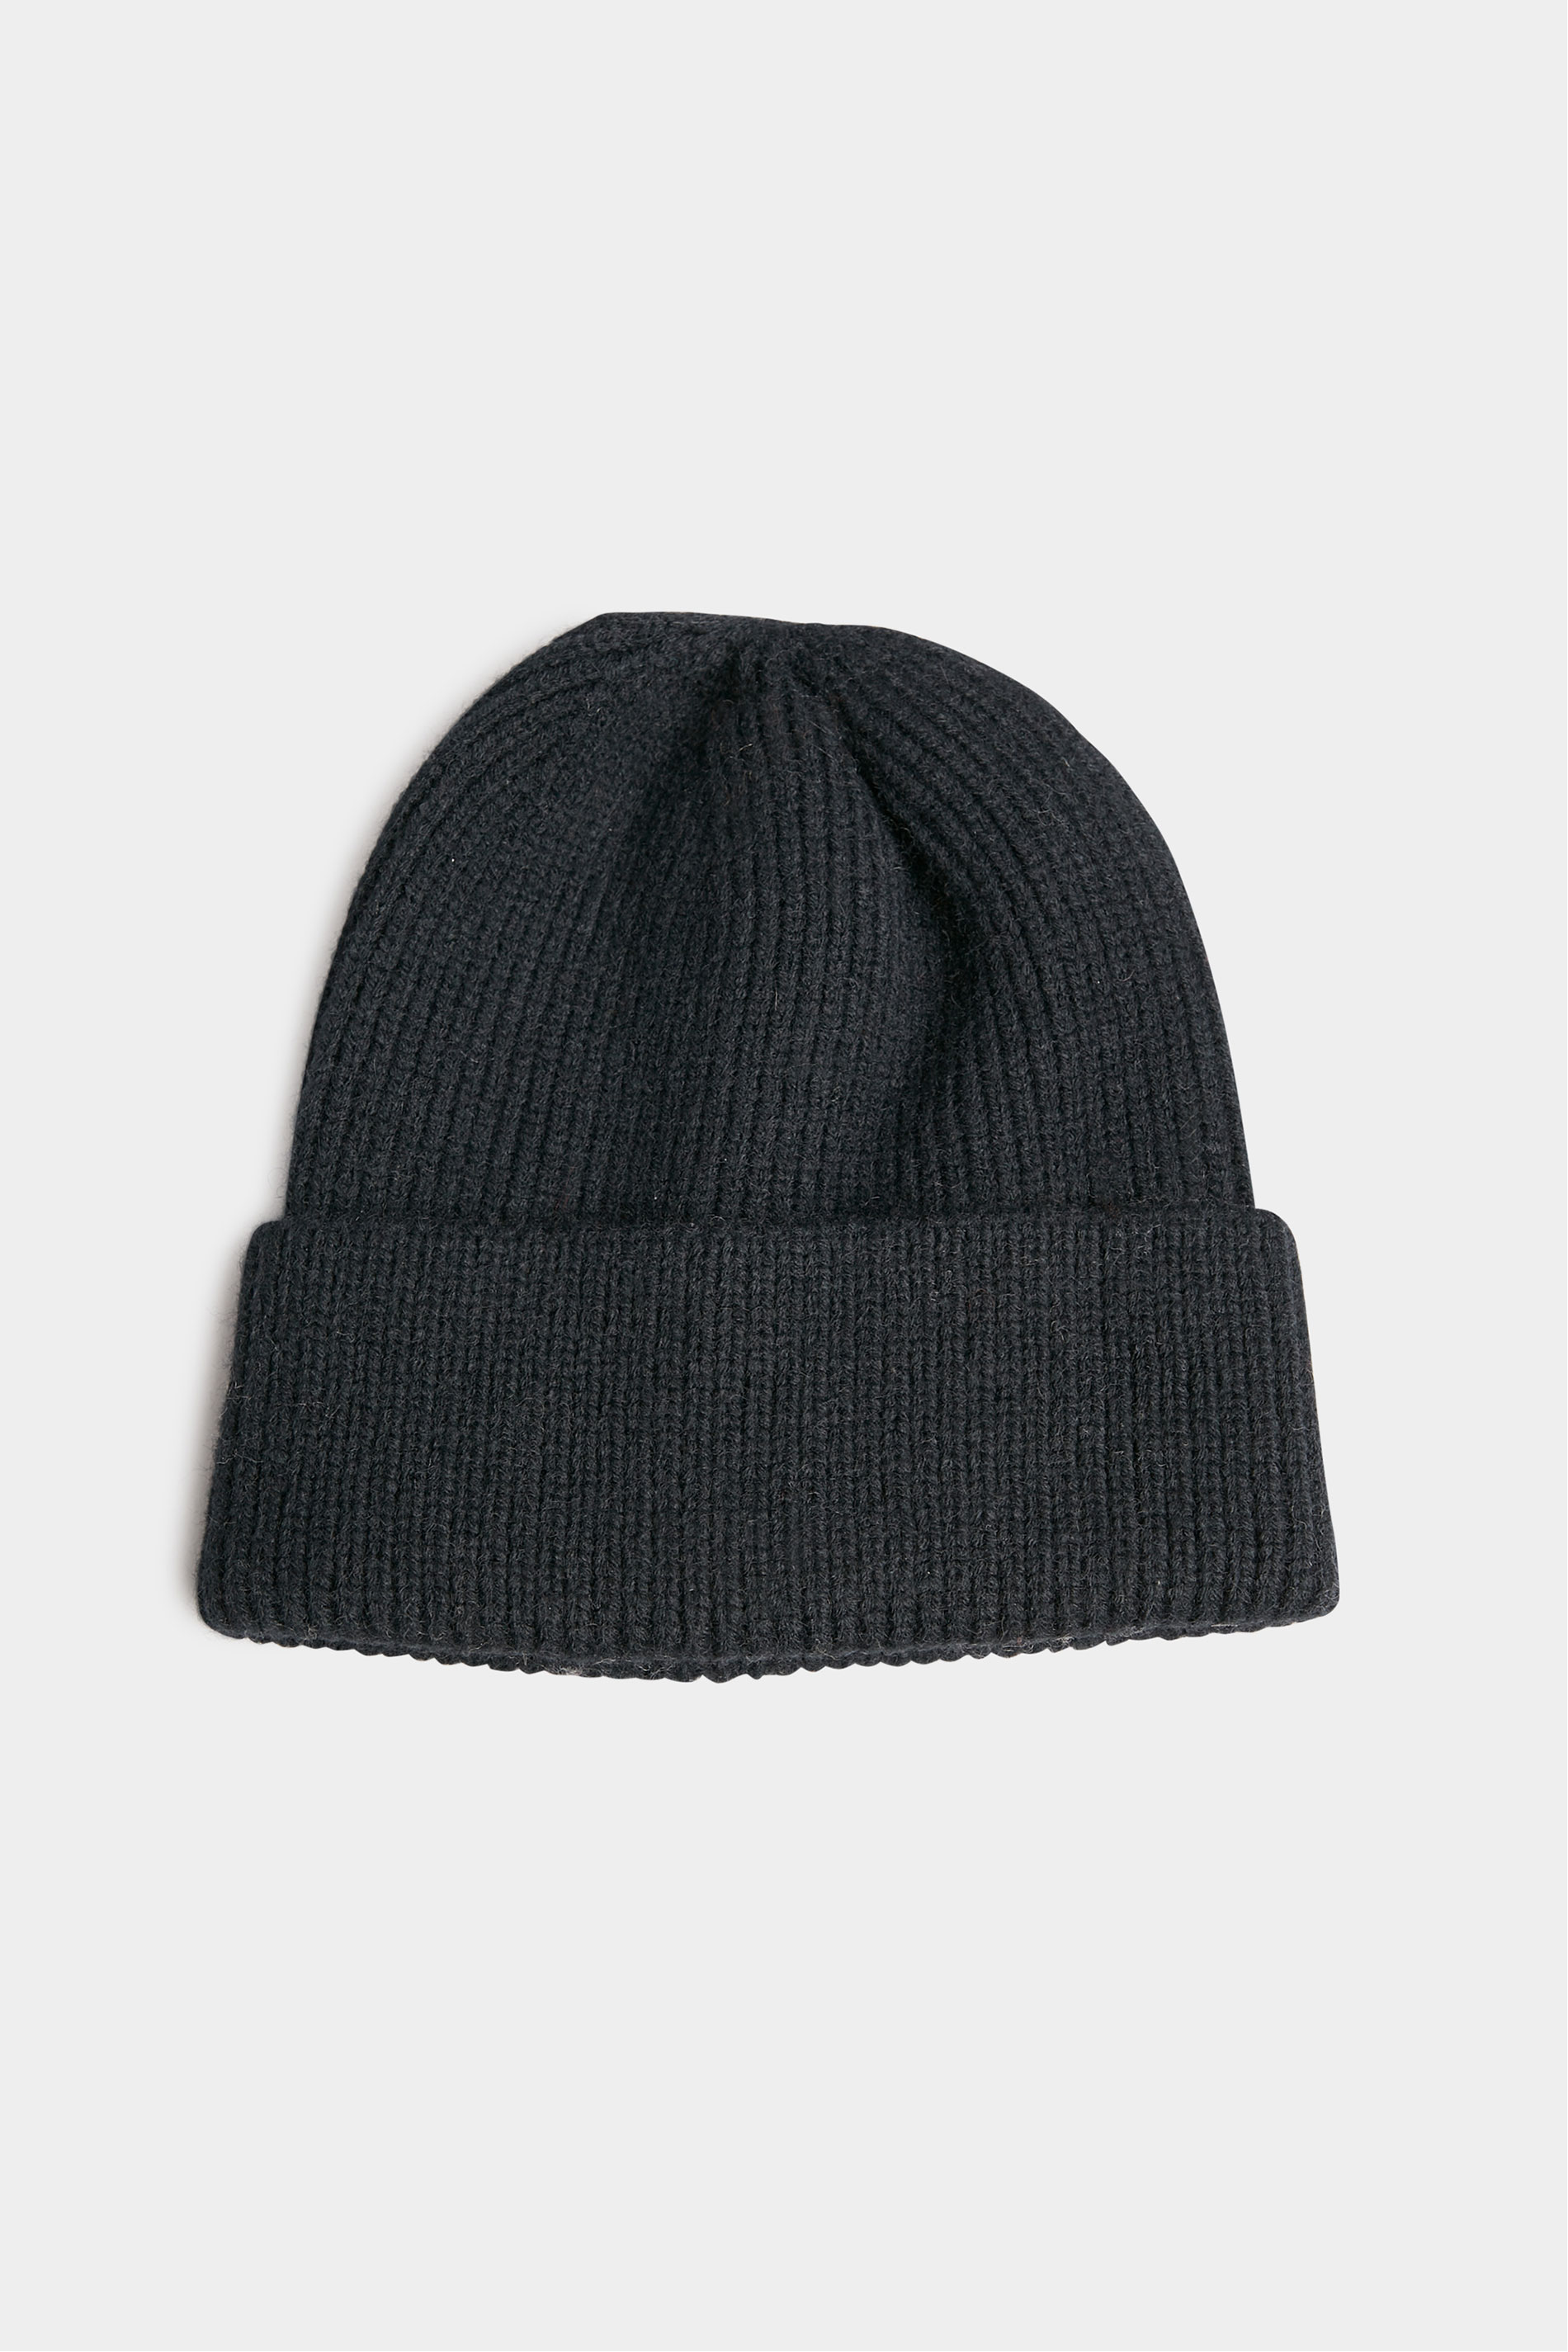 Black Knitted Soft Touch Beanie Hat_A.jpg